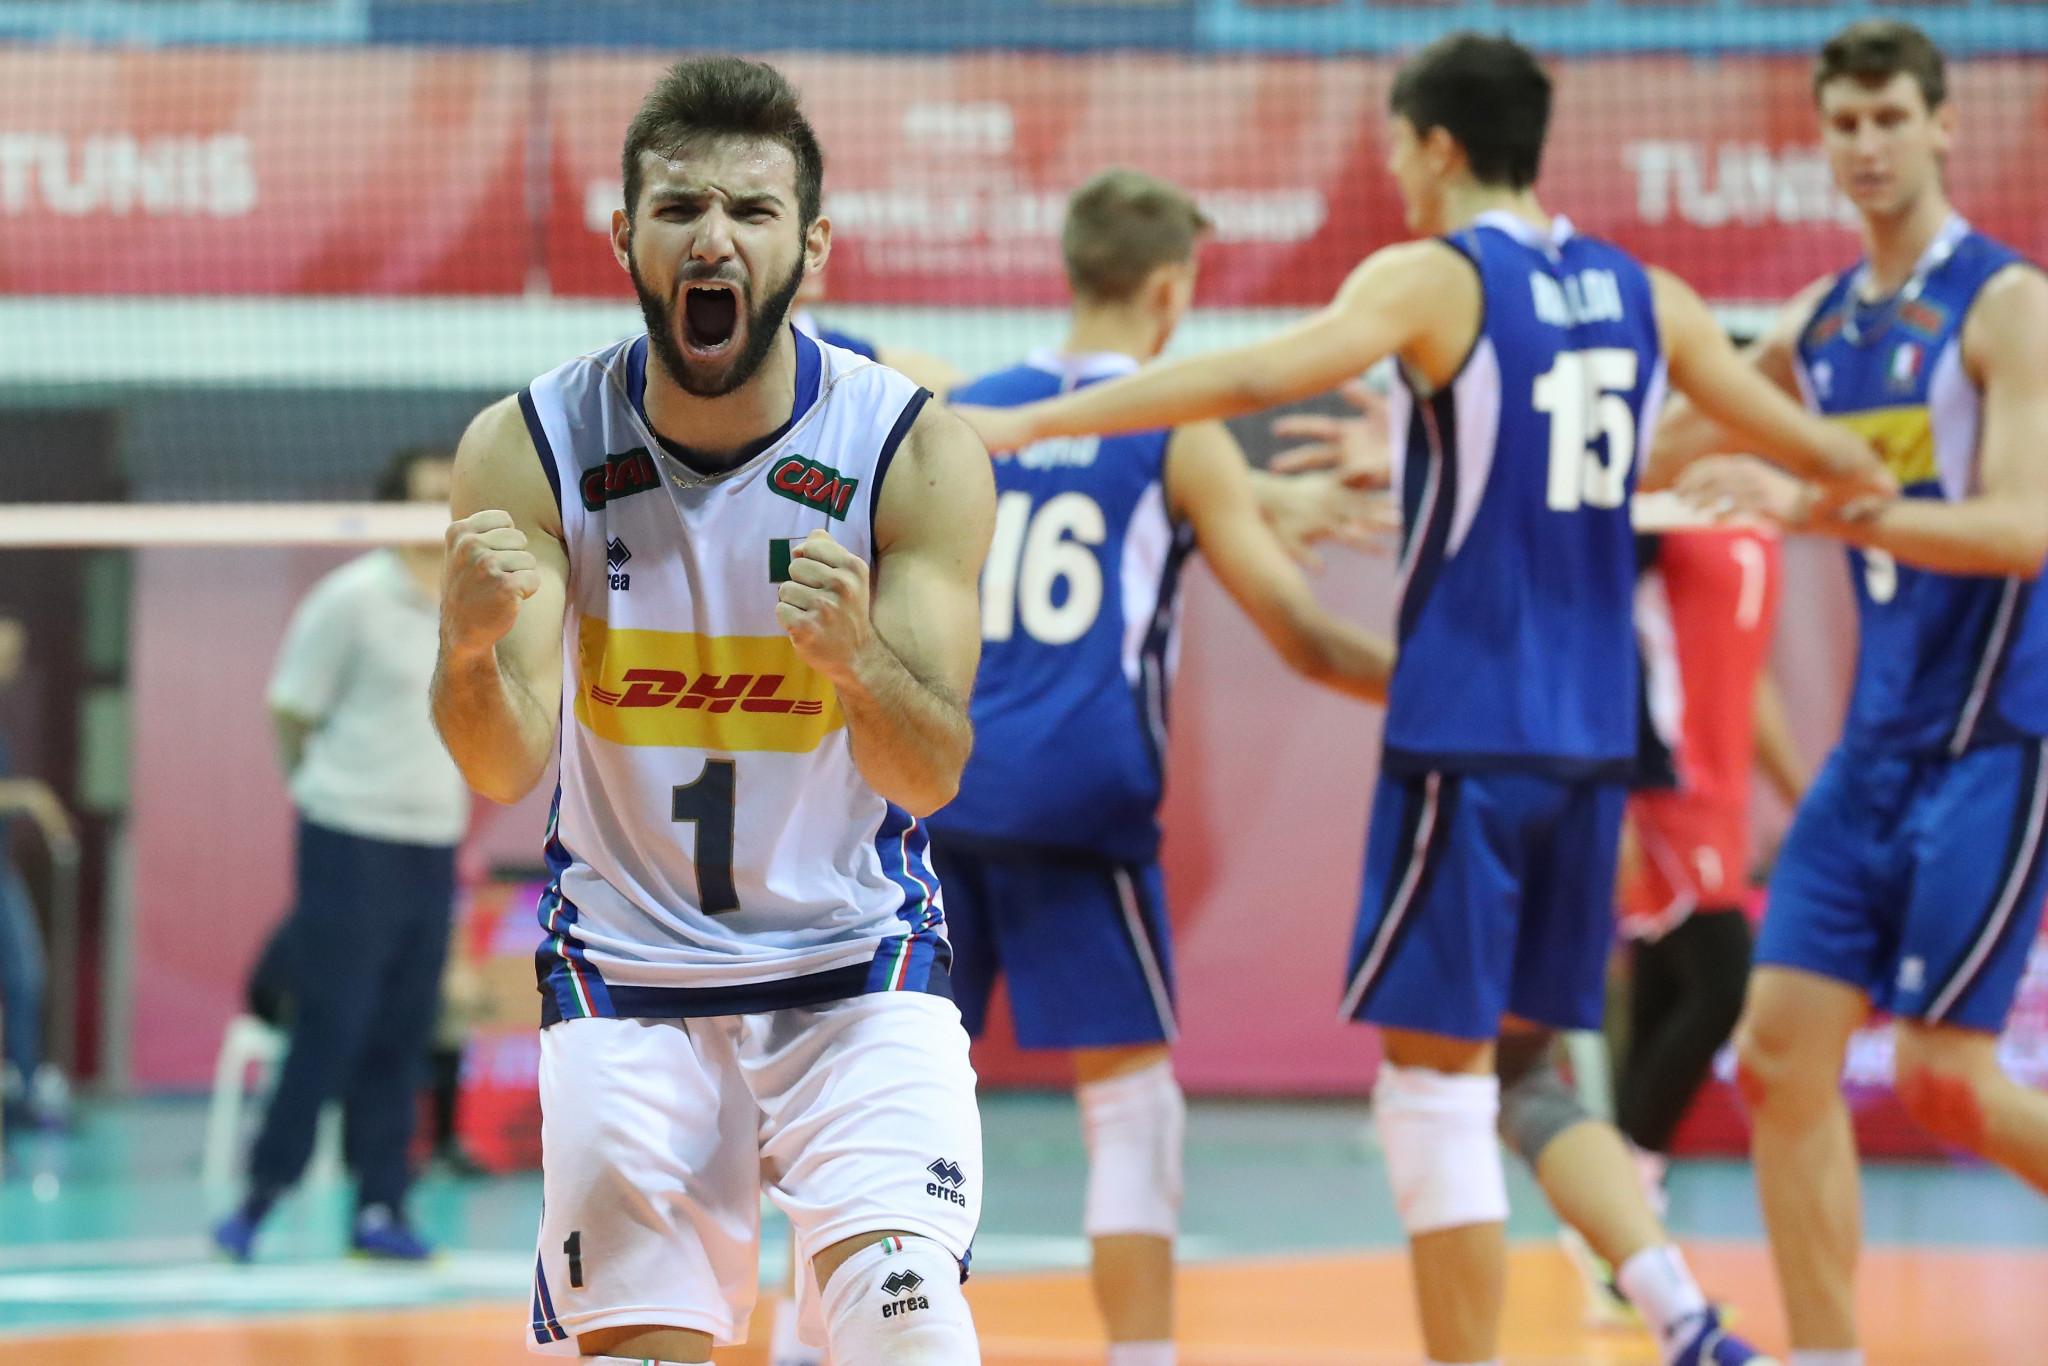 Italy's Damiano Catania celebrates as his team beats Egypt to reach the final in Tunis ©FIVB